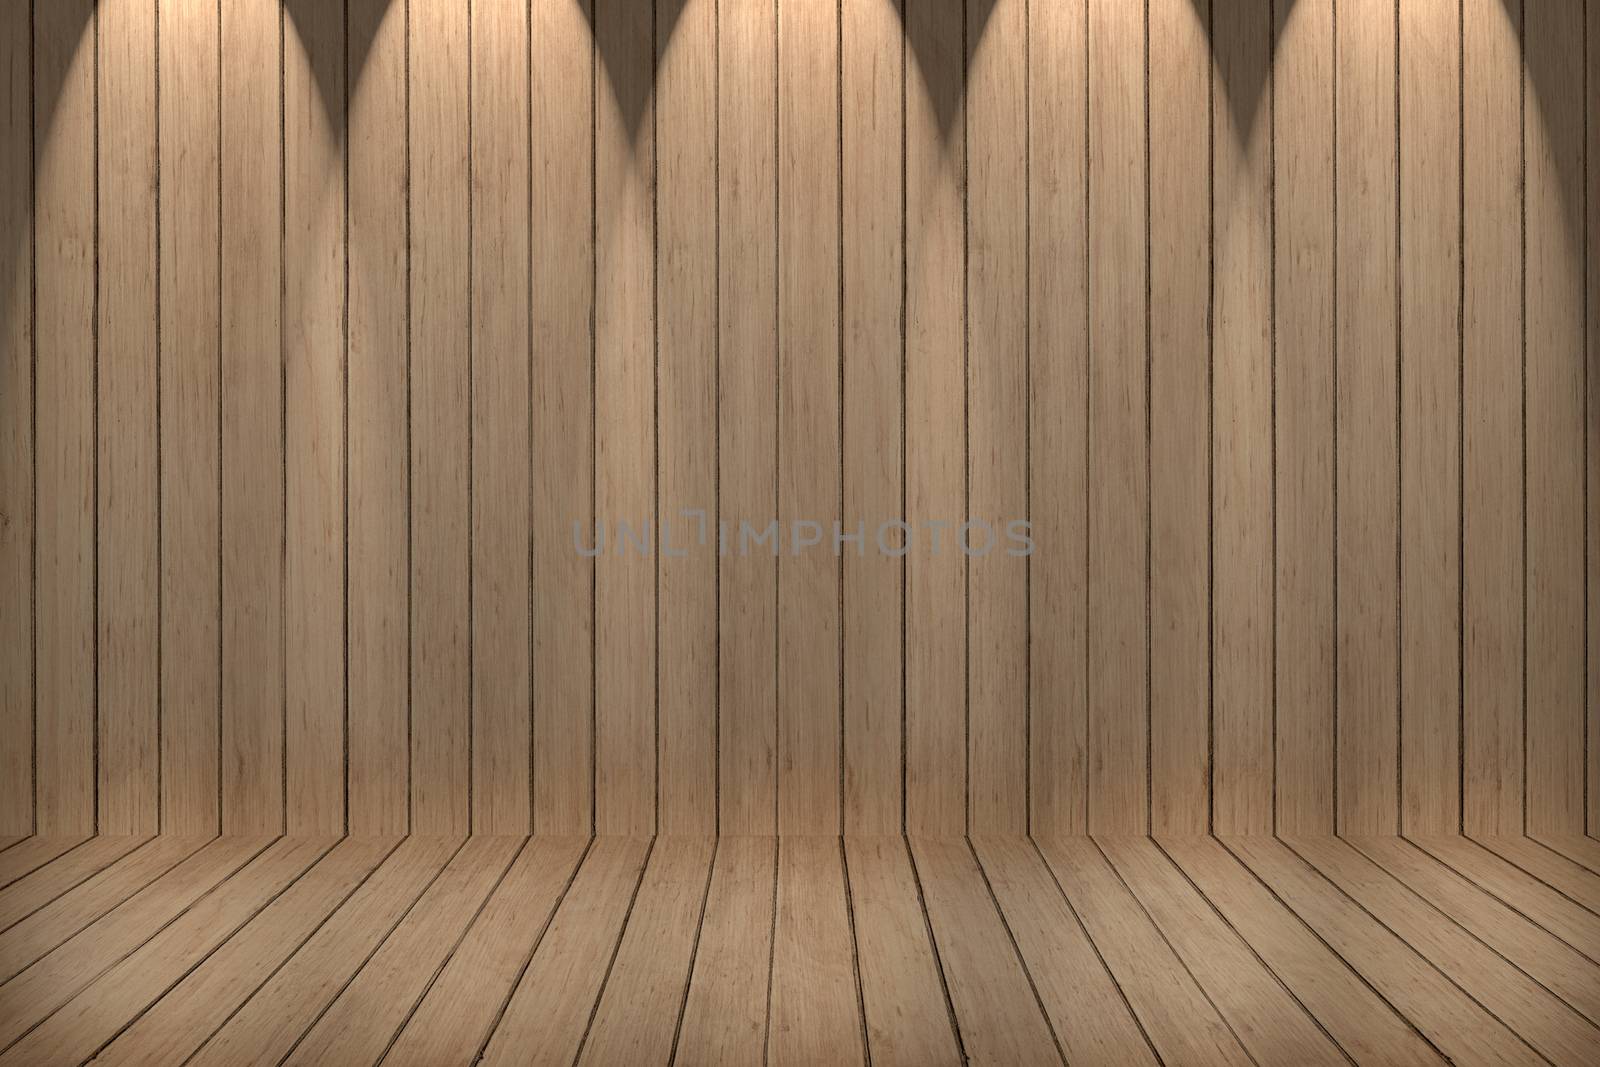 wall and floor siding weathered wood background, wood texture.